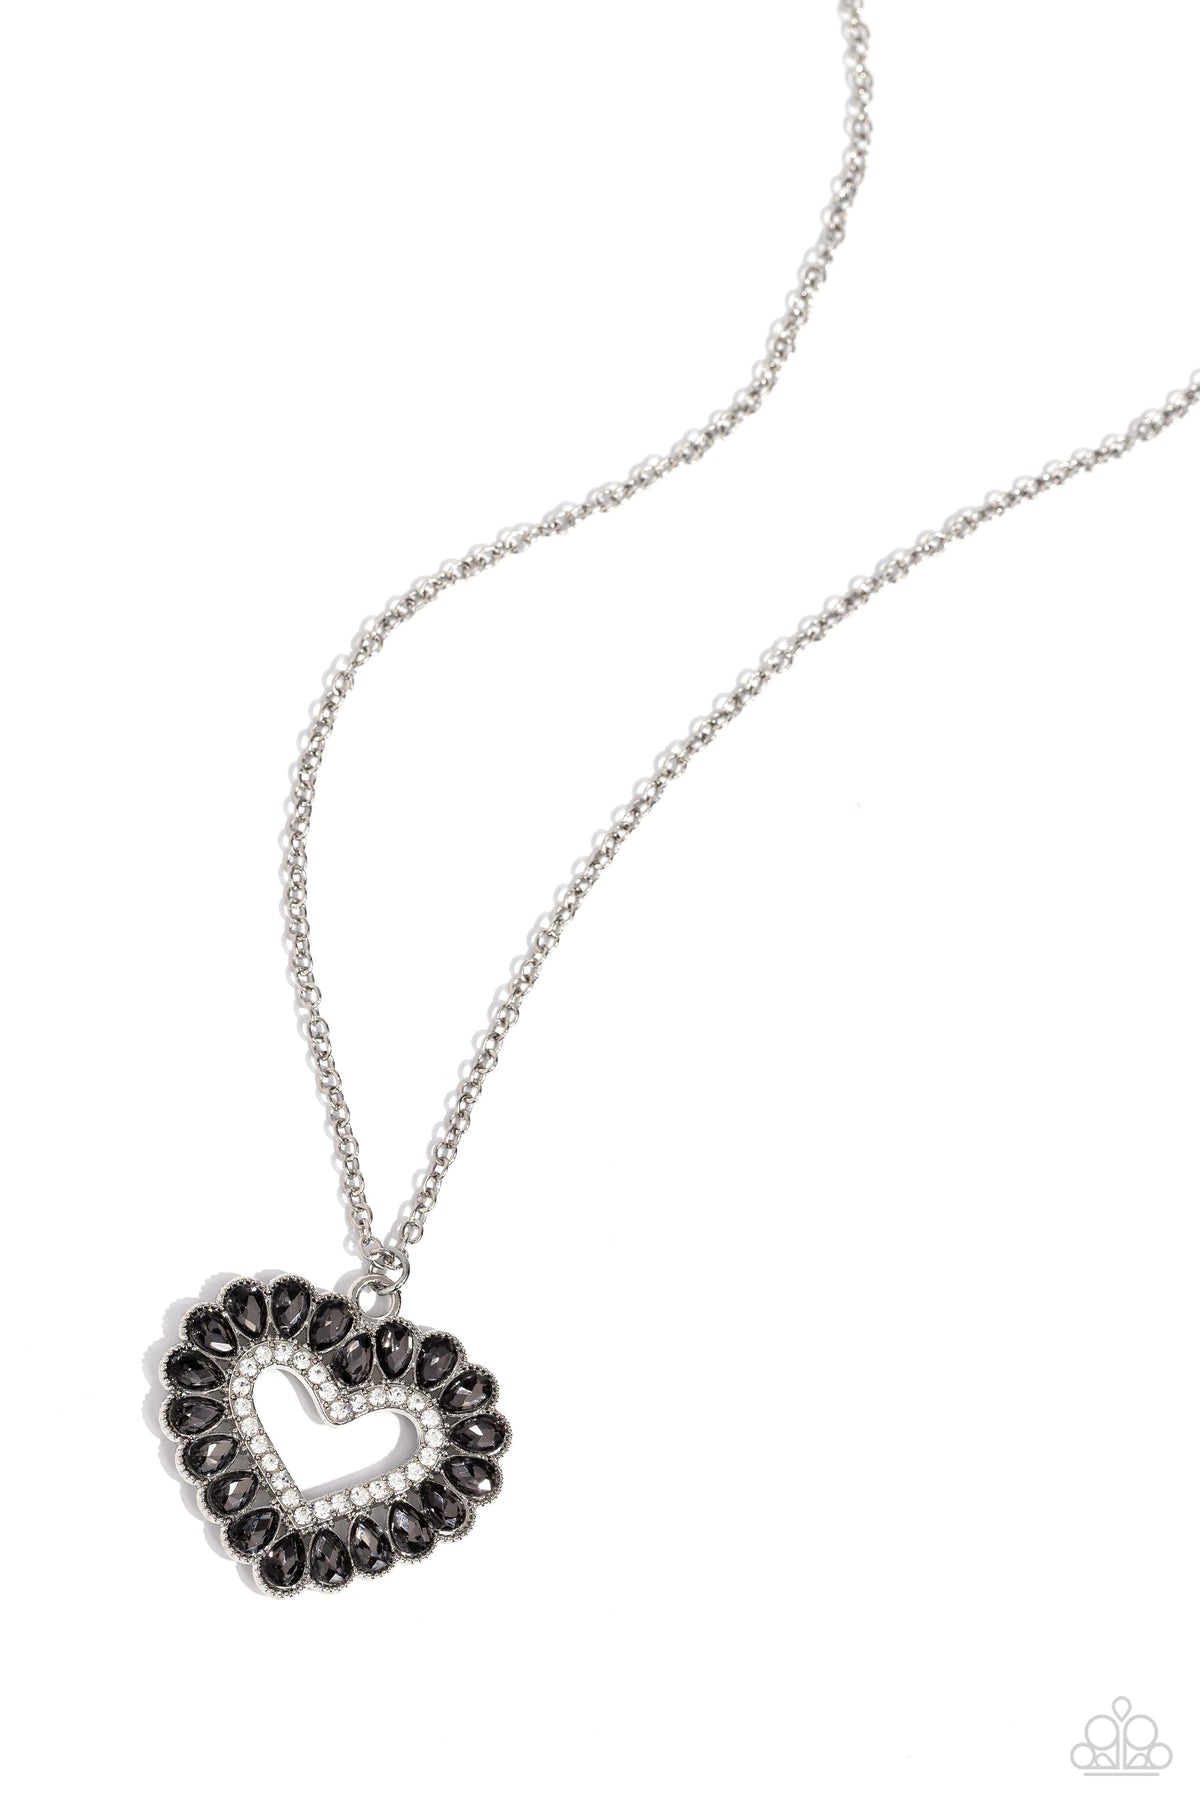 FLIRT No More Silver &amp; White Rhinestone Heart Necklace - Paparazzi Accessories- lightbox - CarasShop.com - $5 Jewelry by Cara Jewels